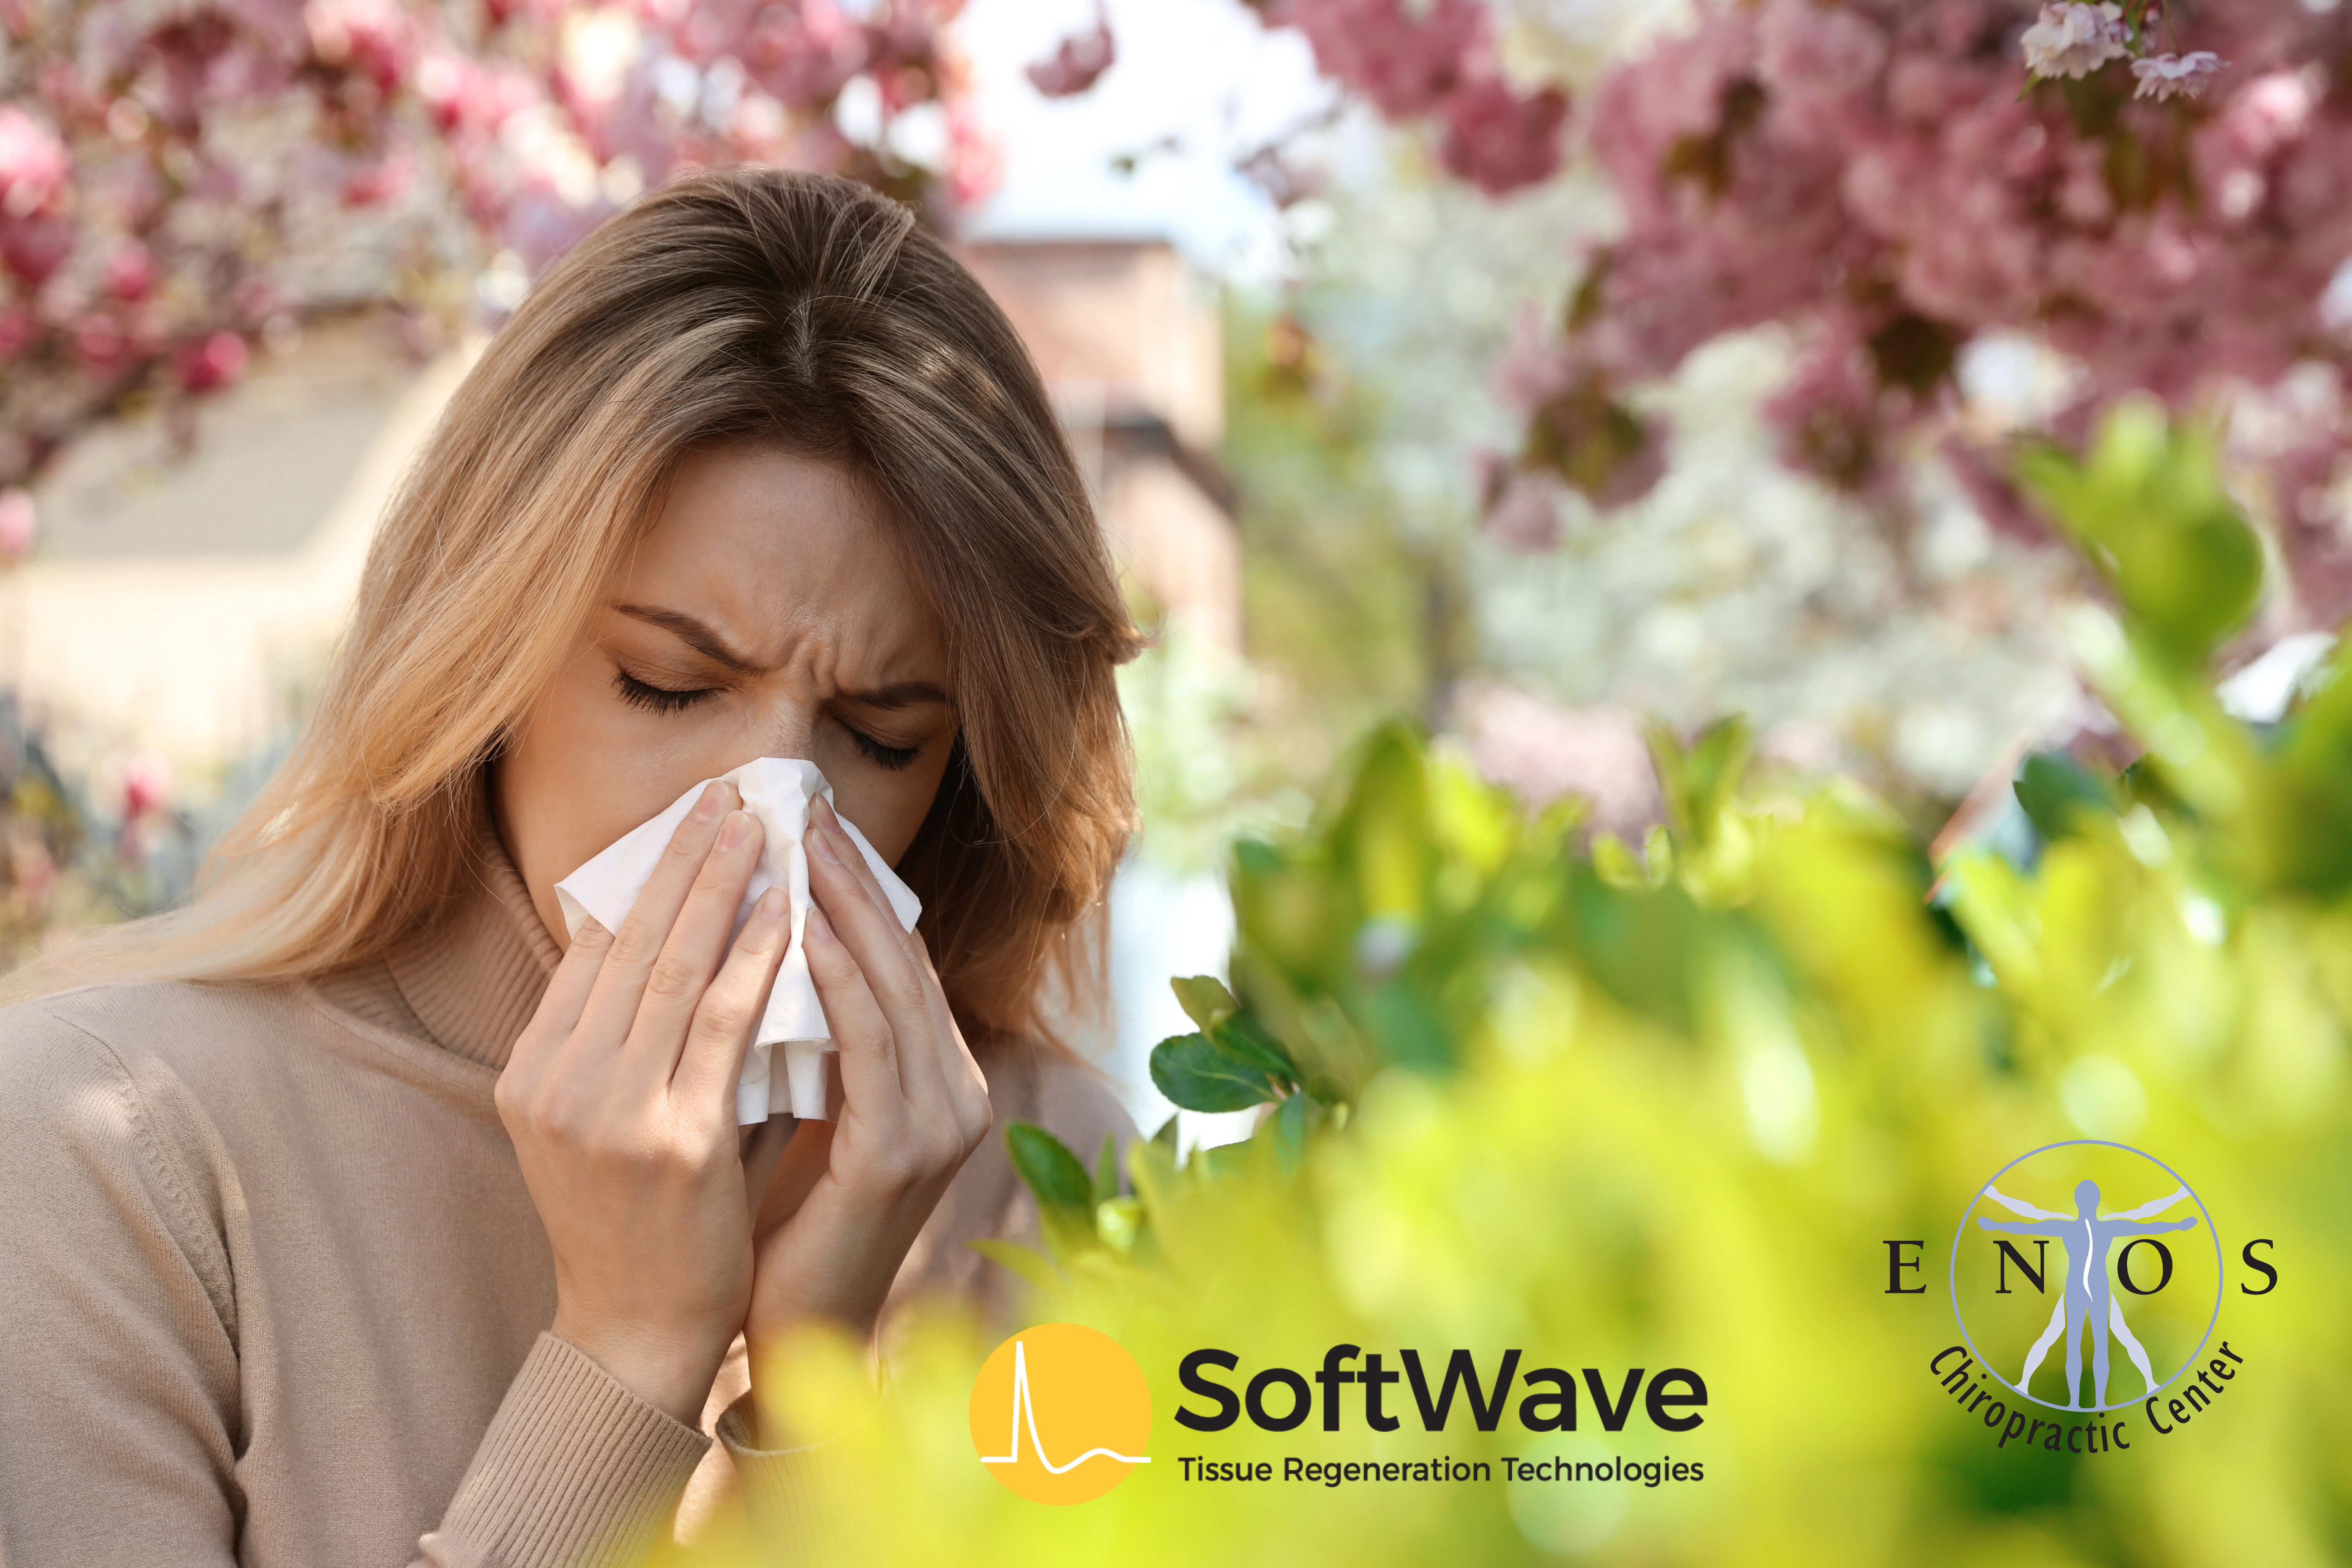 Finding Relief from Sinus Issues with SoftWave TRT Therapy at Enos Chiropractic Center